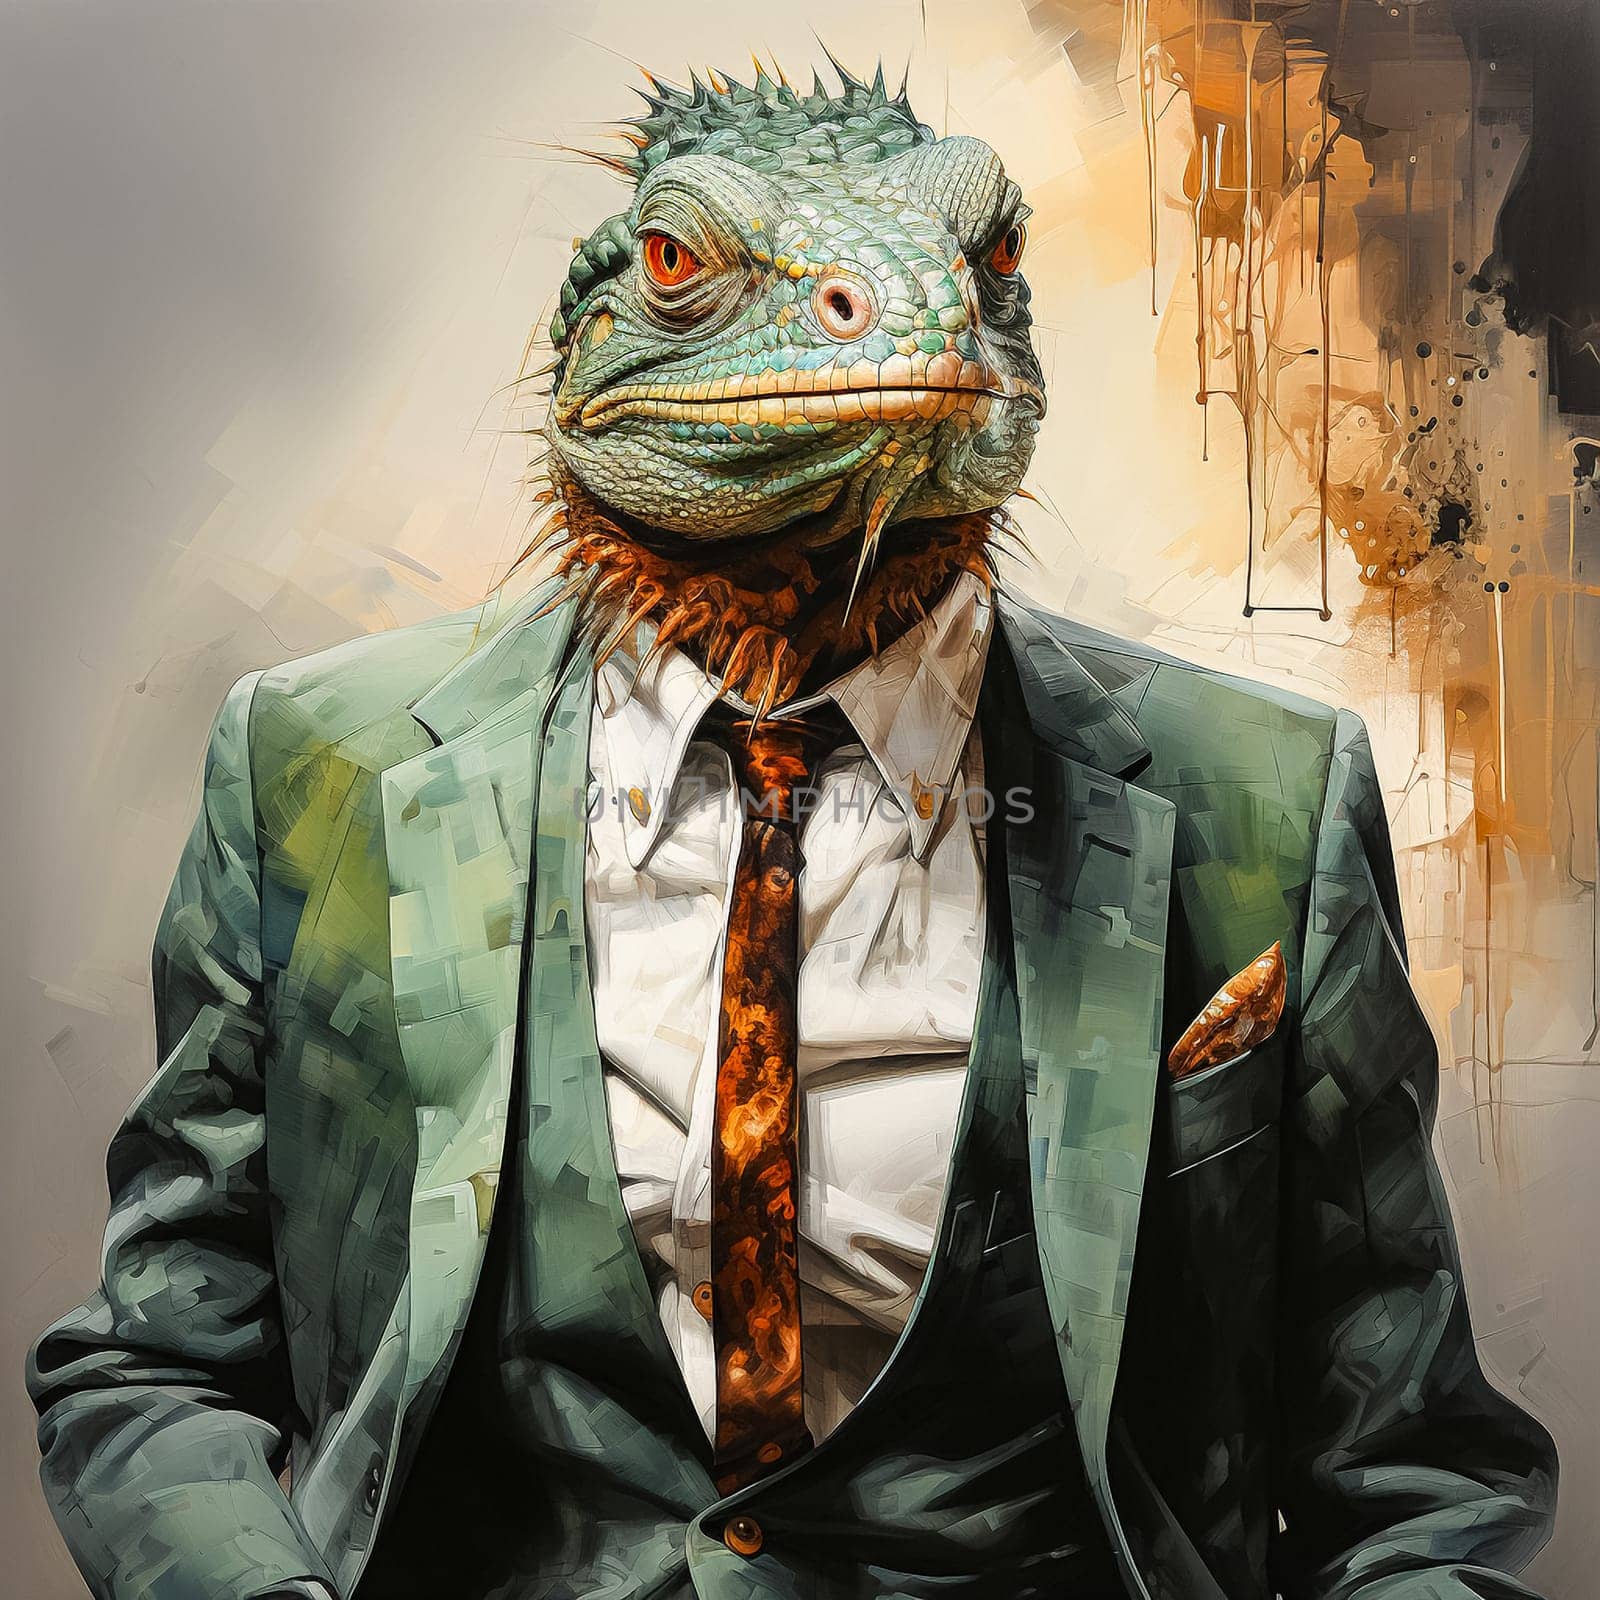 watercolor illustration of a lizard in a business suit, a unique and captivating image by Alla_Morozova93